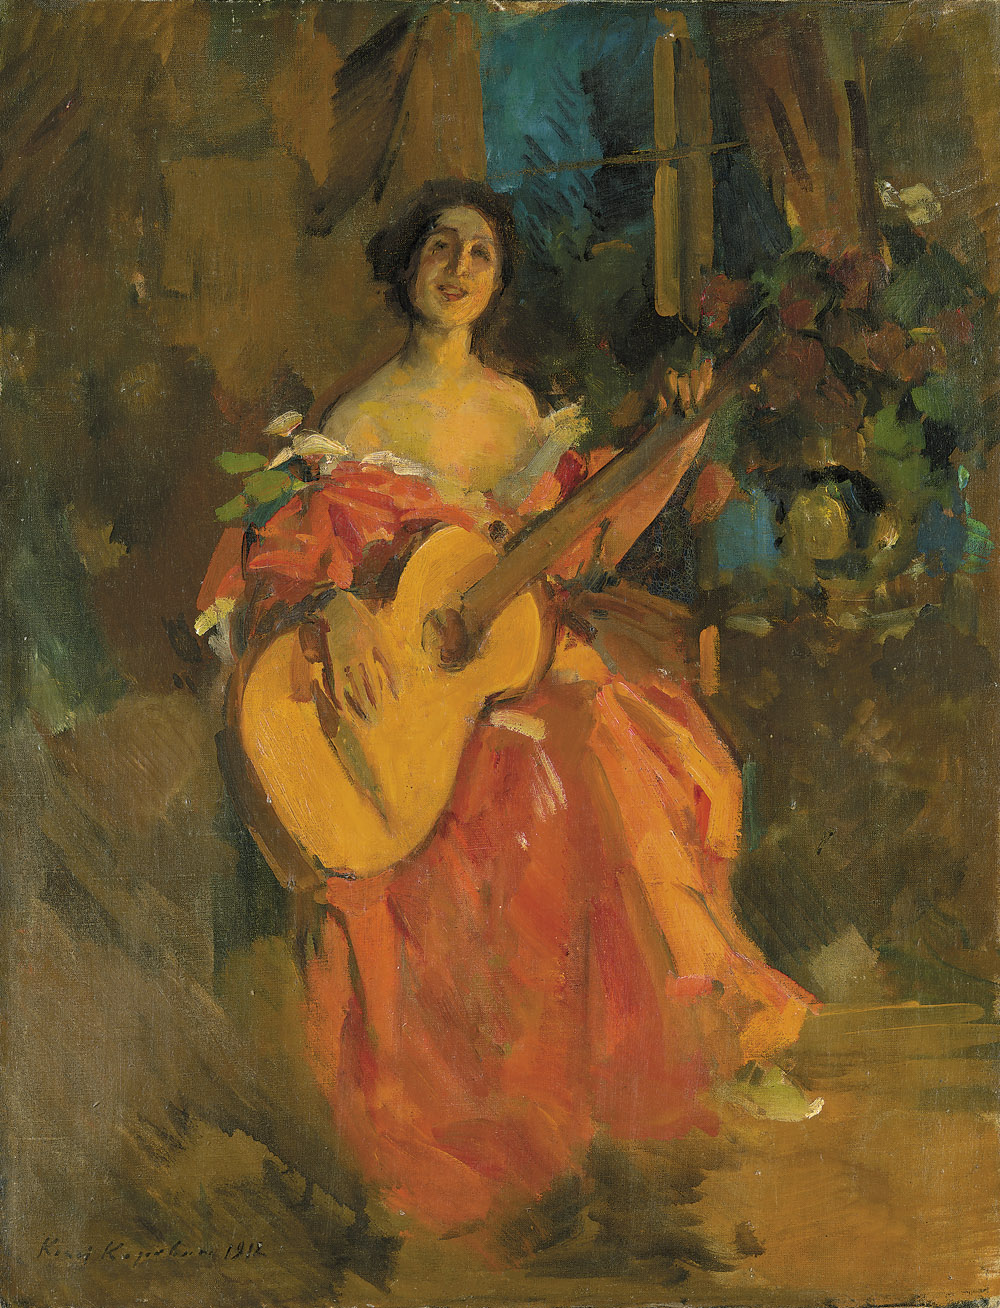 Lady with a Guitar